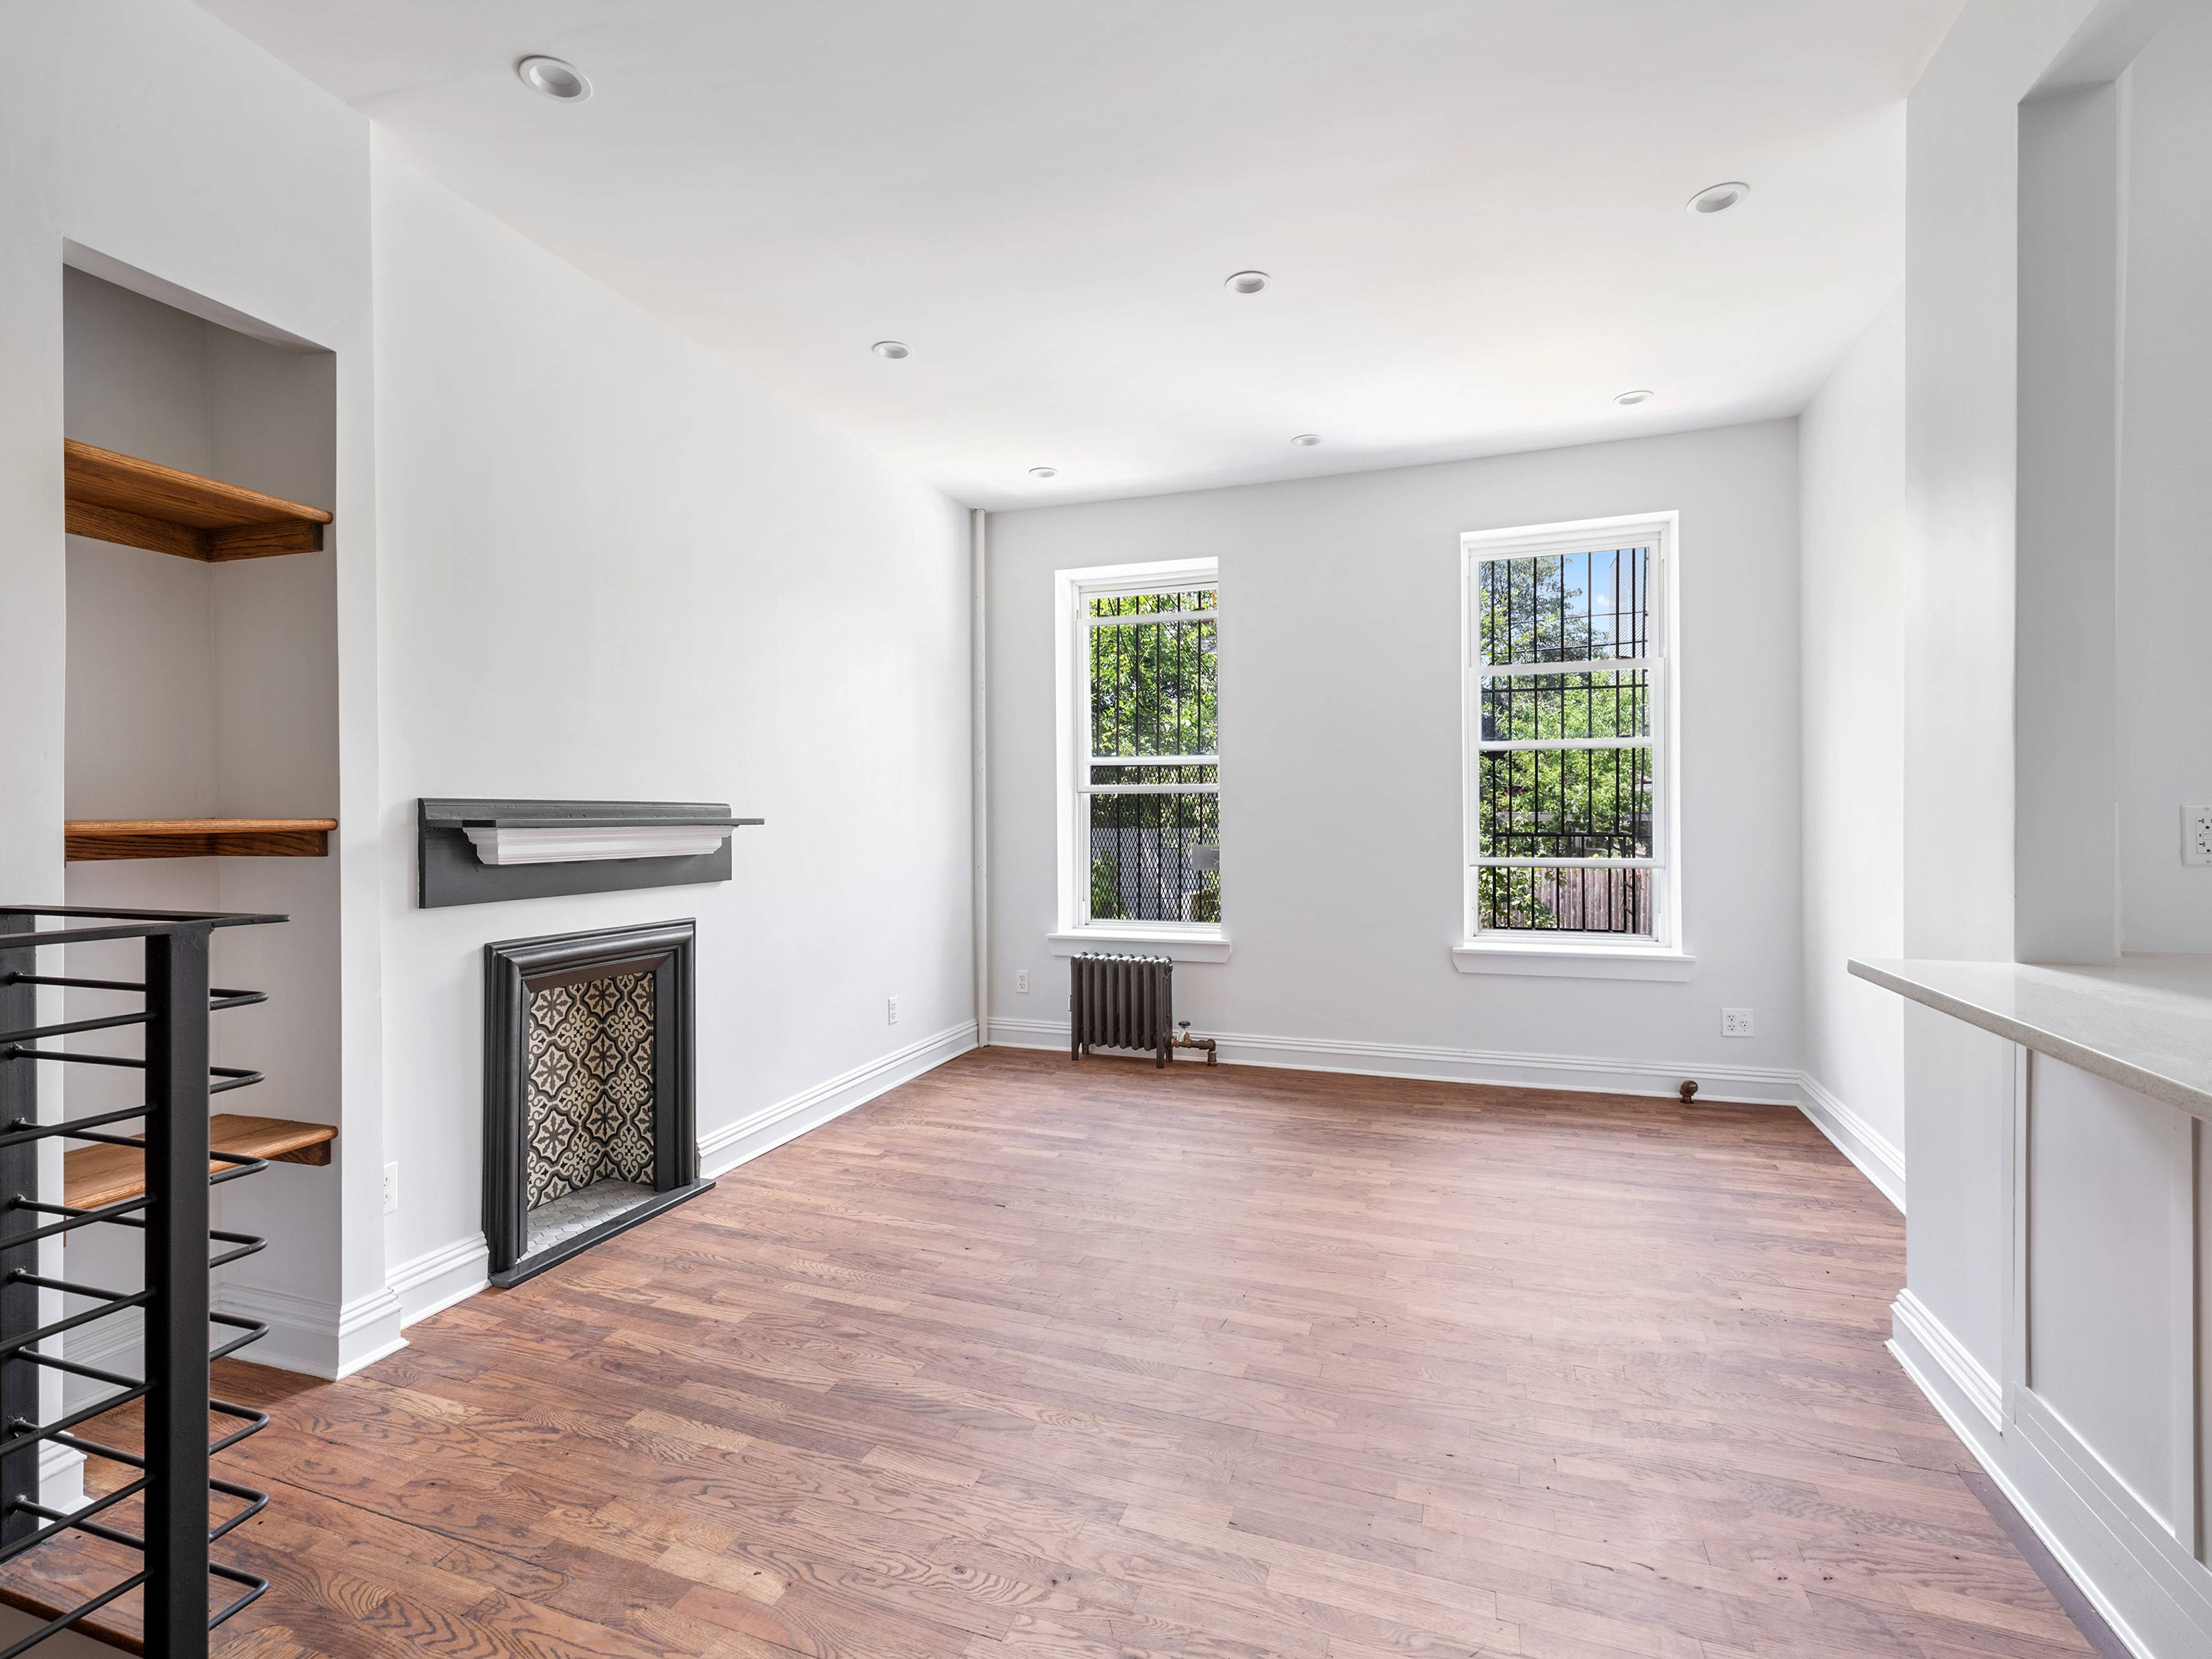 Originally built in 1925, 1111 Putnam Ave has been renovated to seamlessly blend modern finishes and classic details.